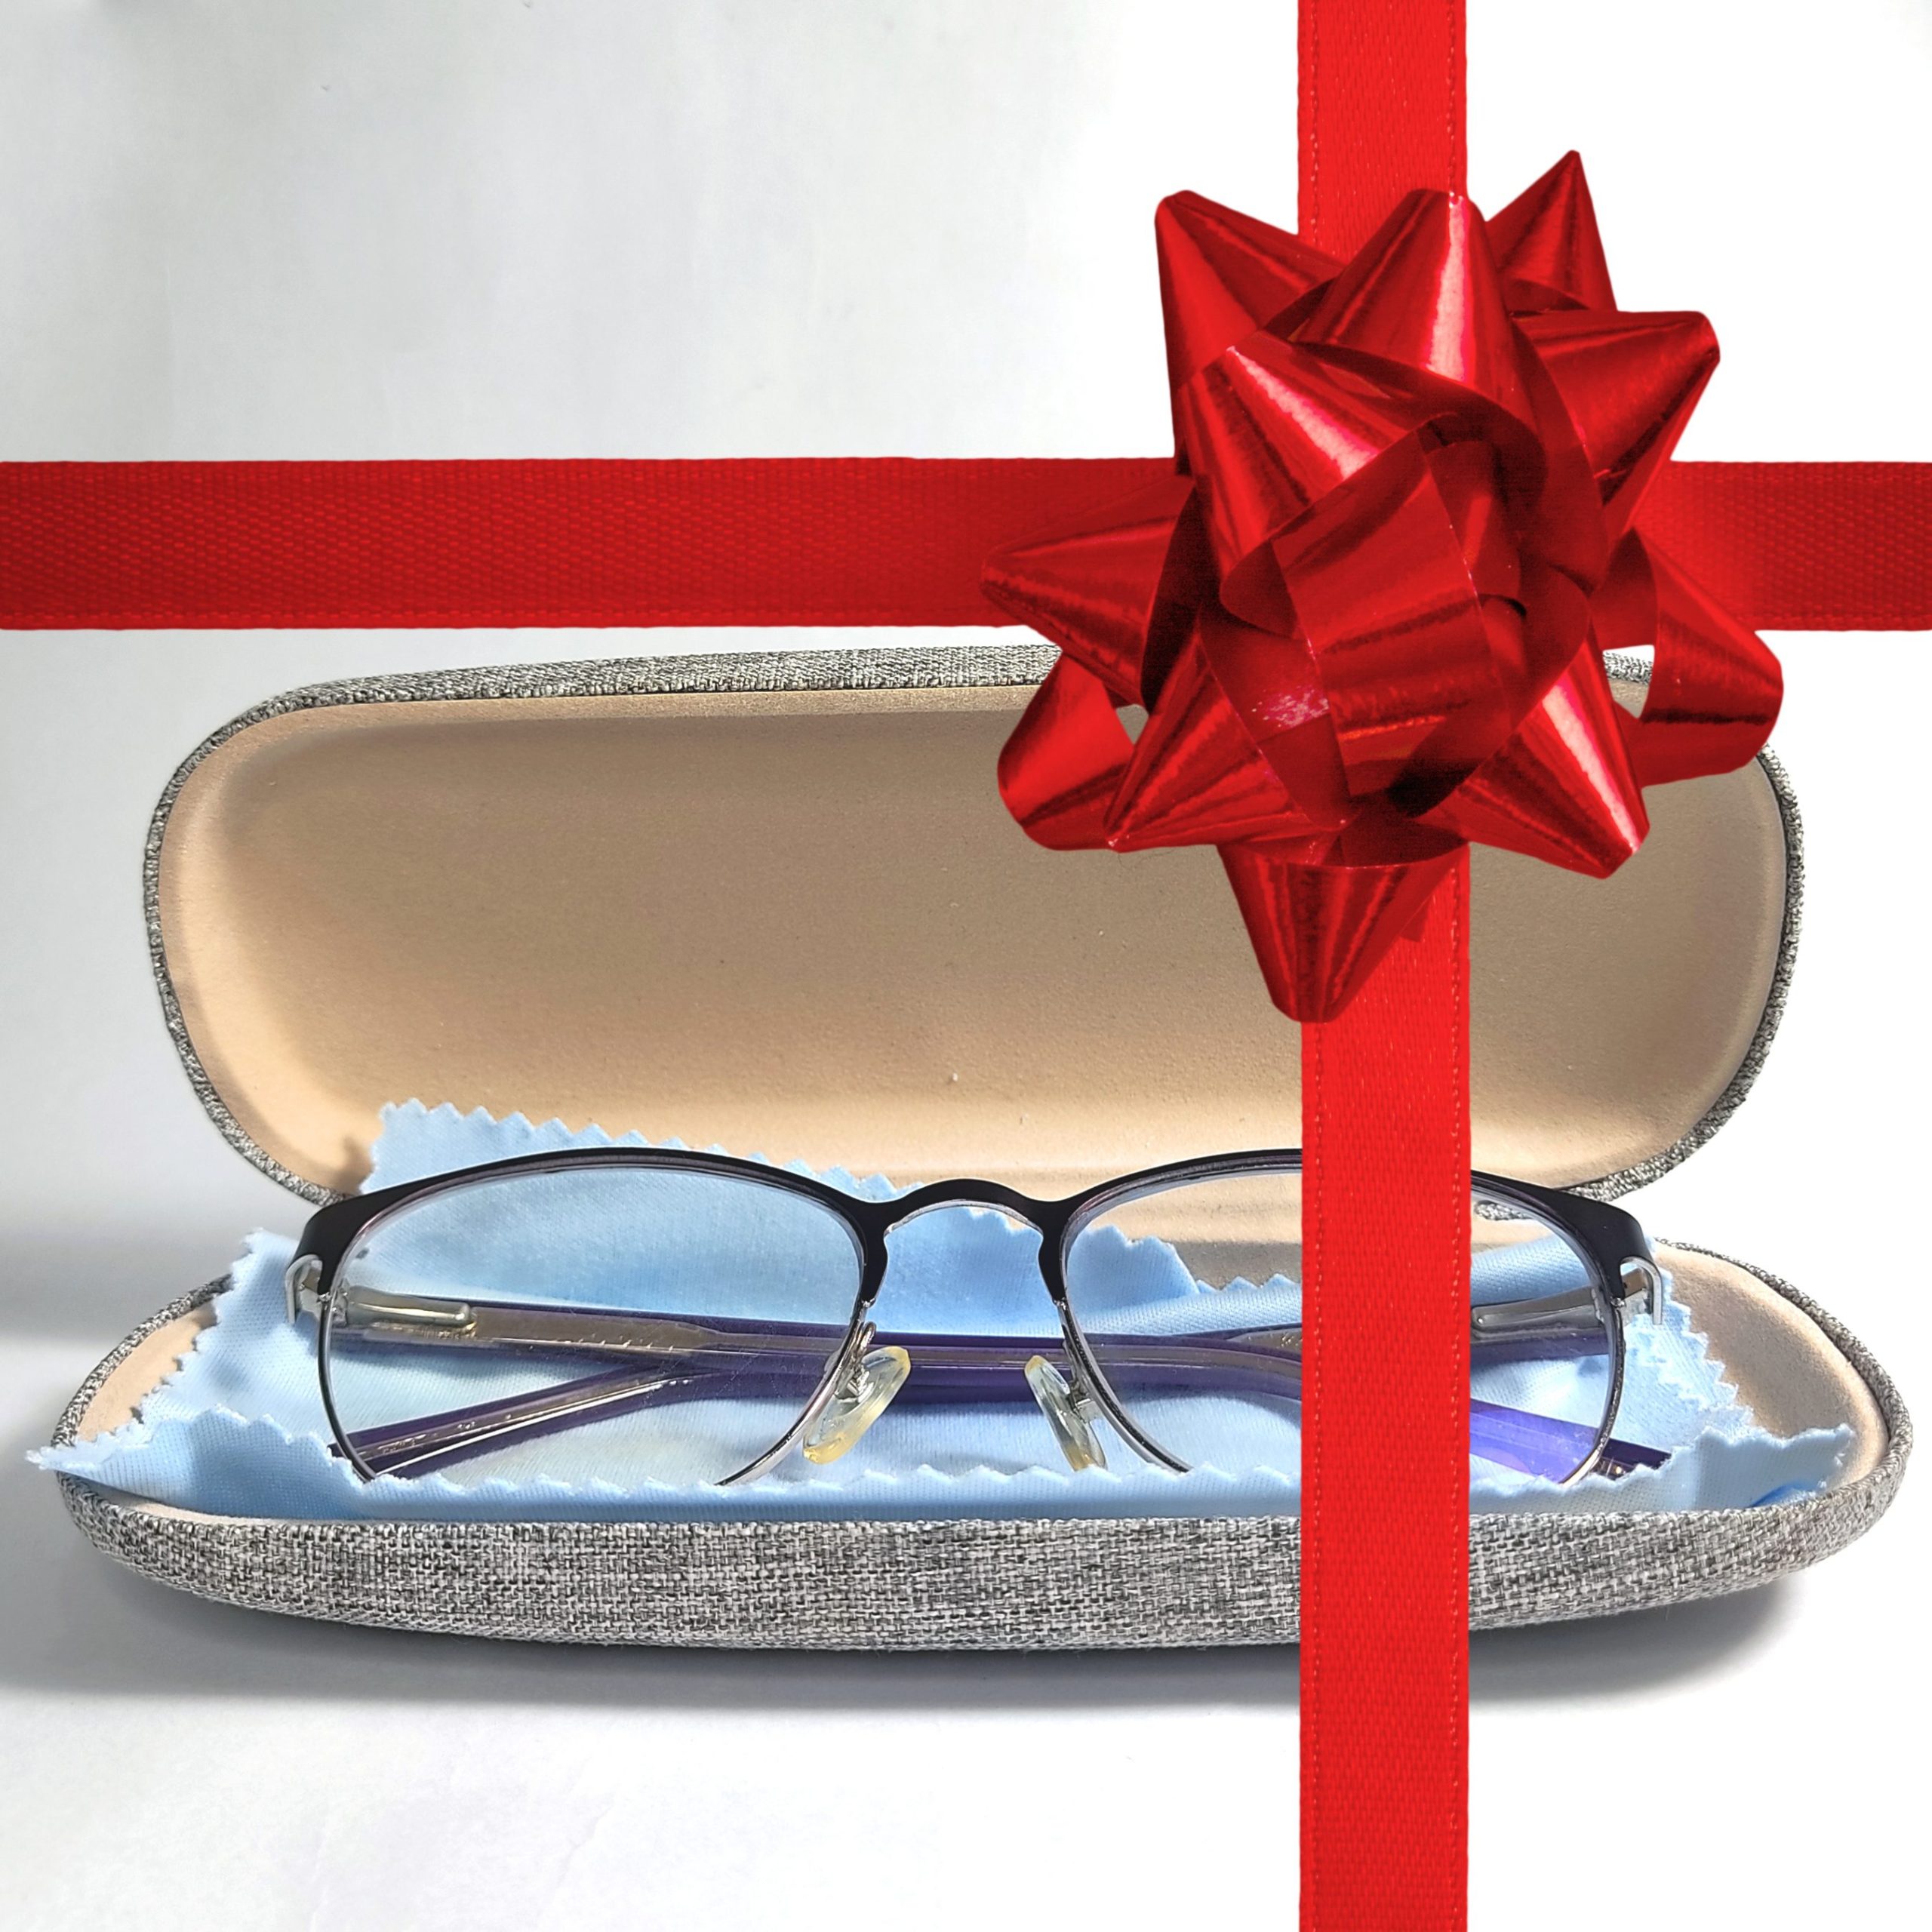 The gift of glasses